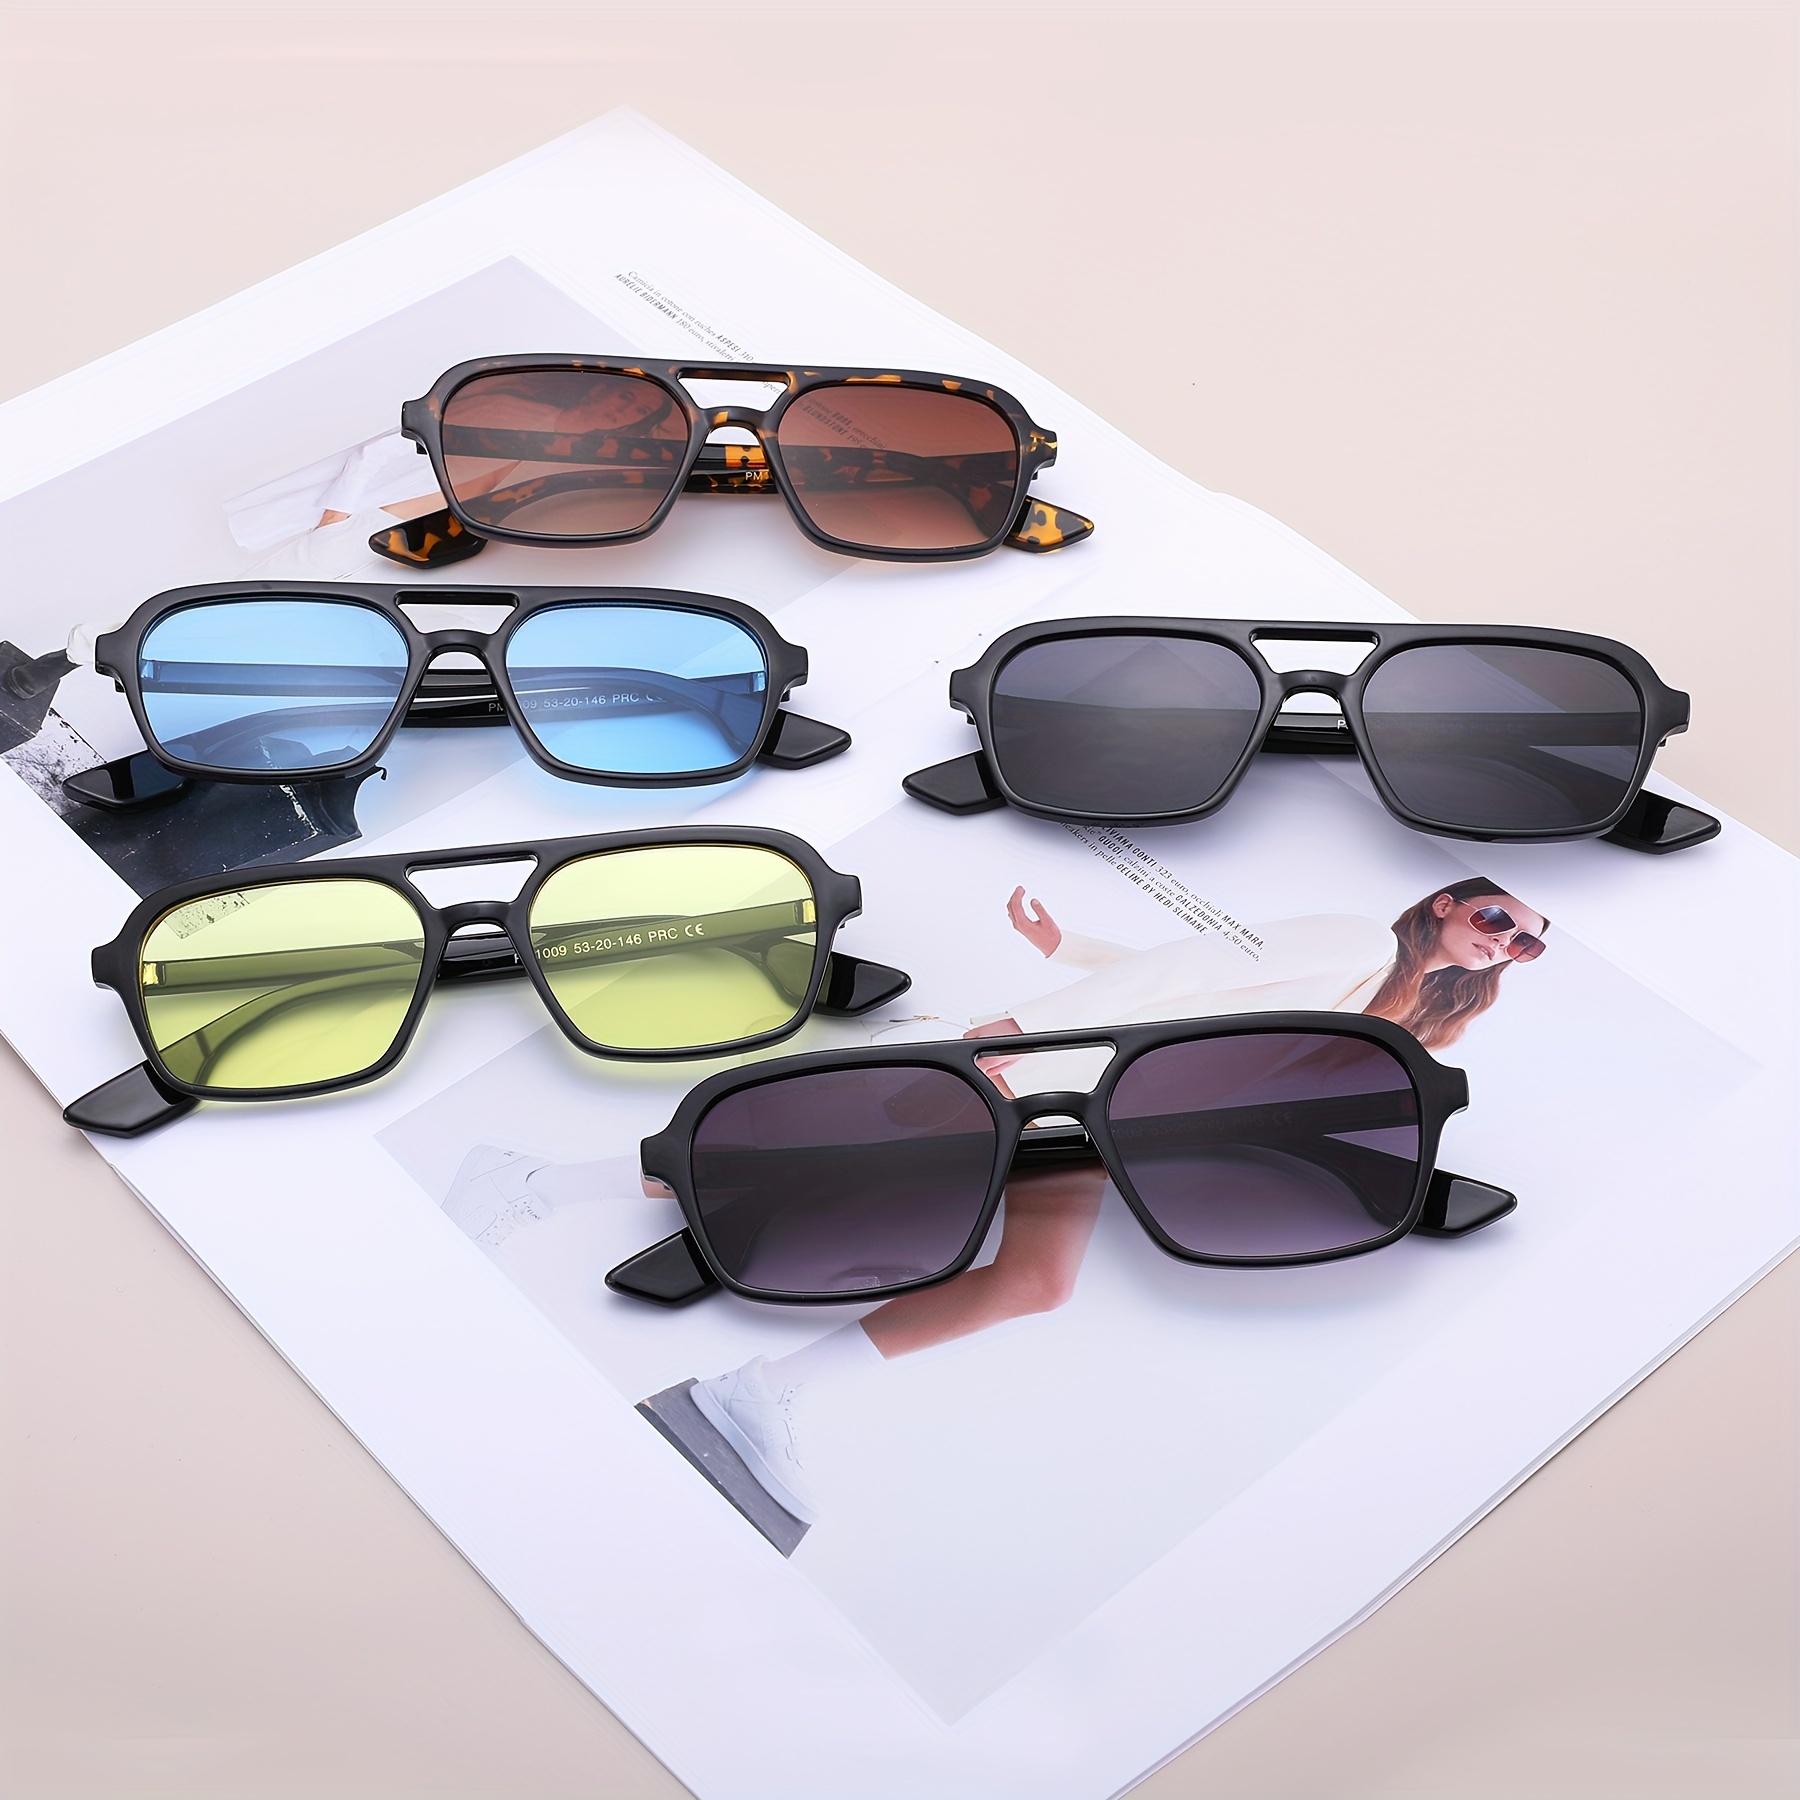 lunettes-uv-luxe